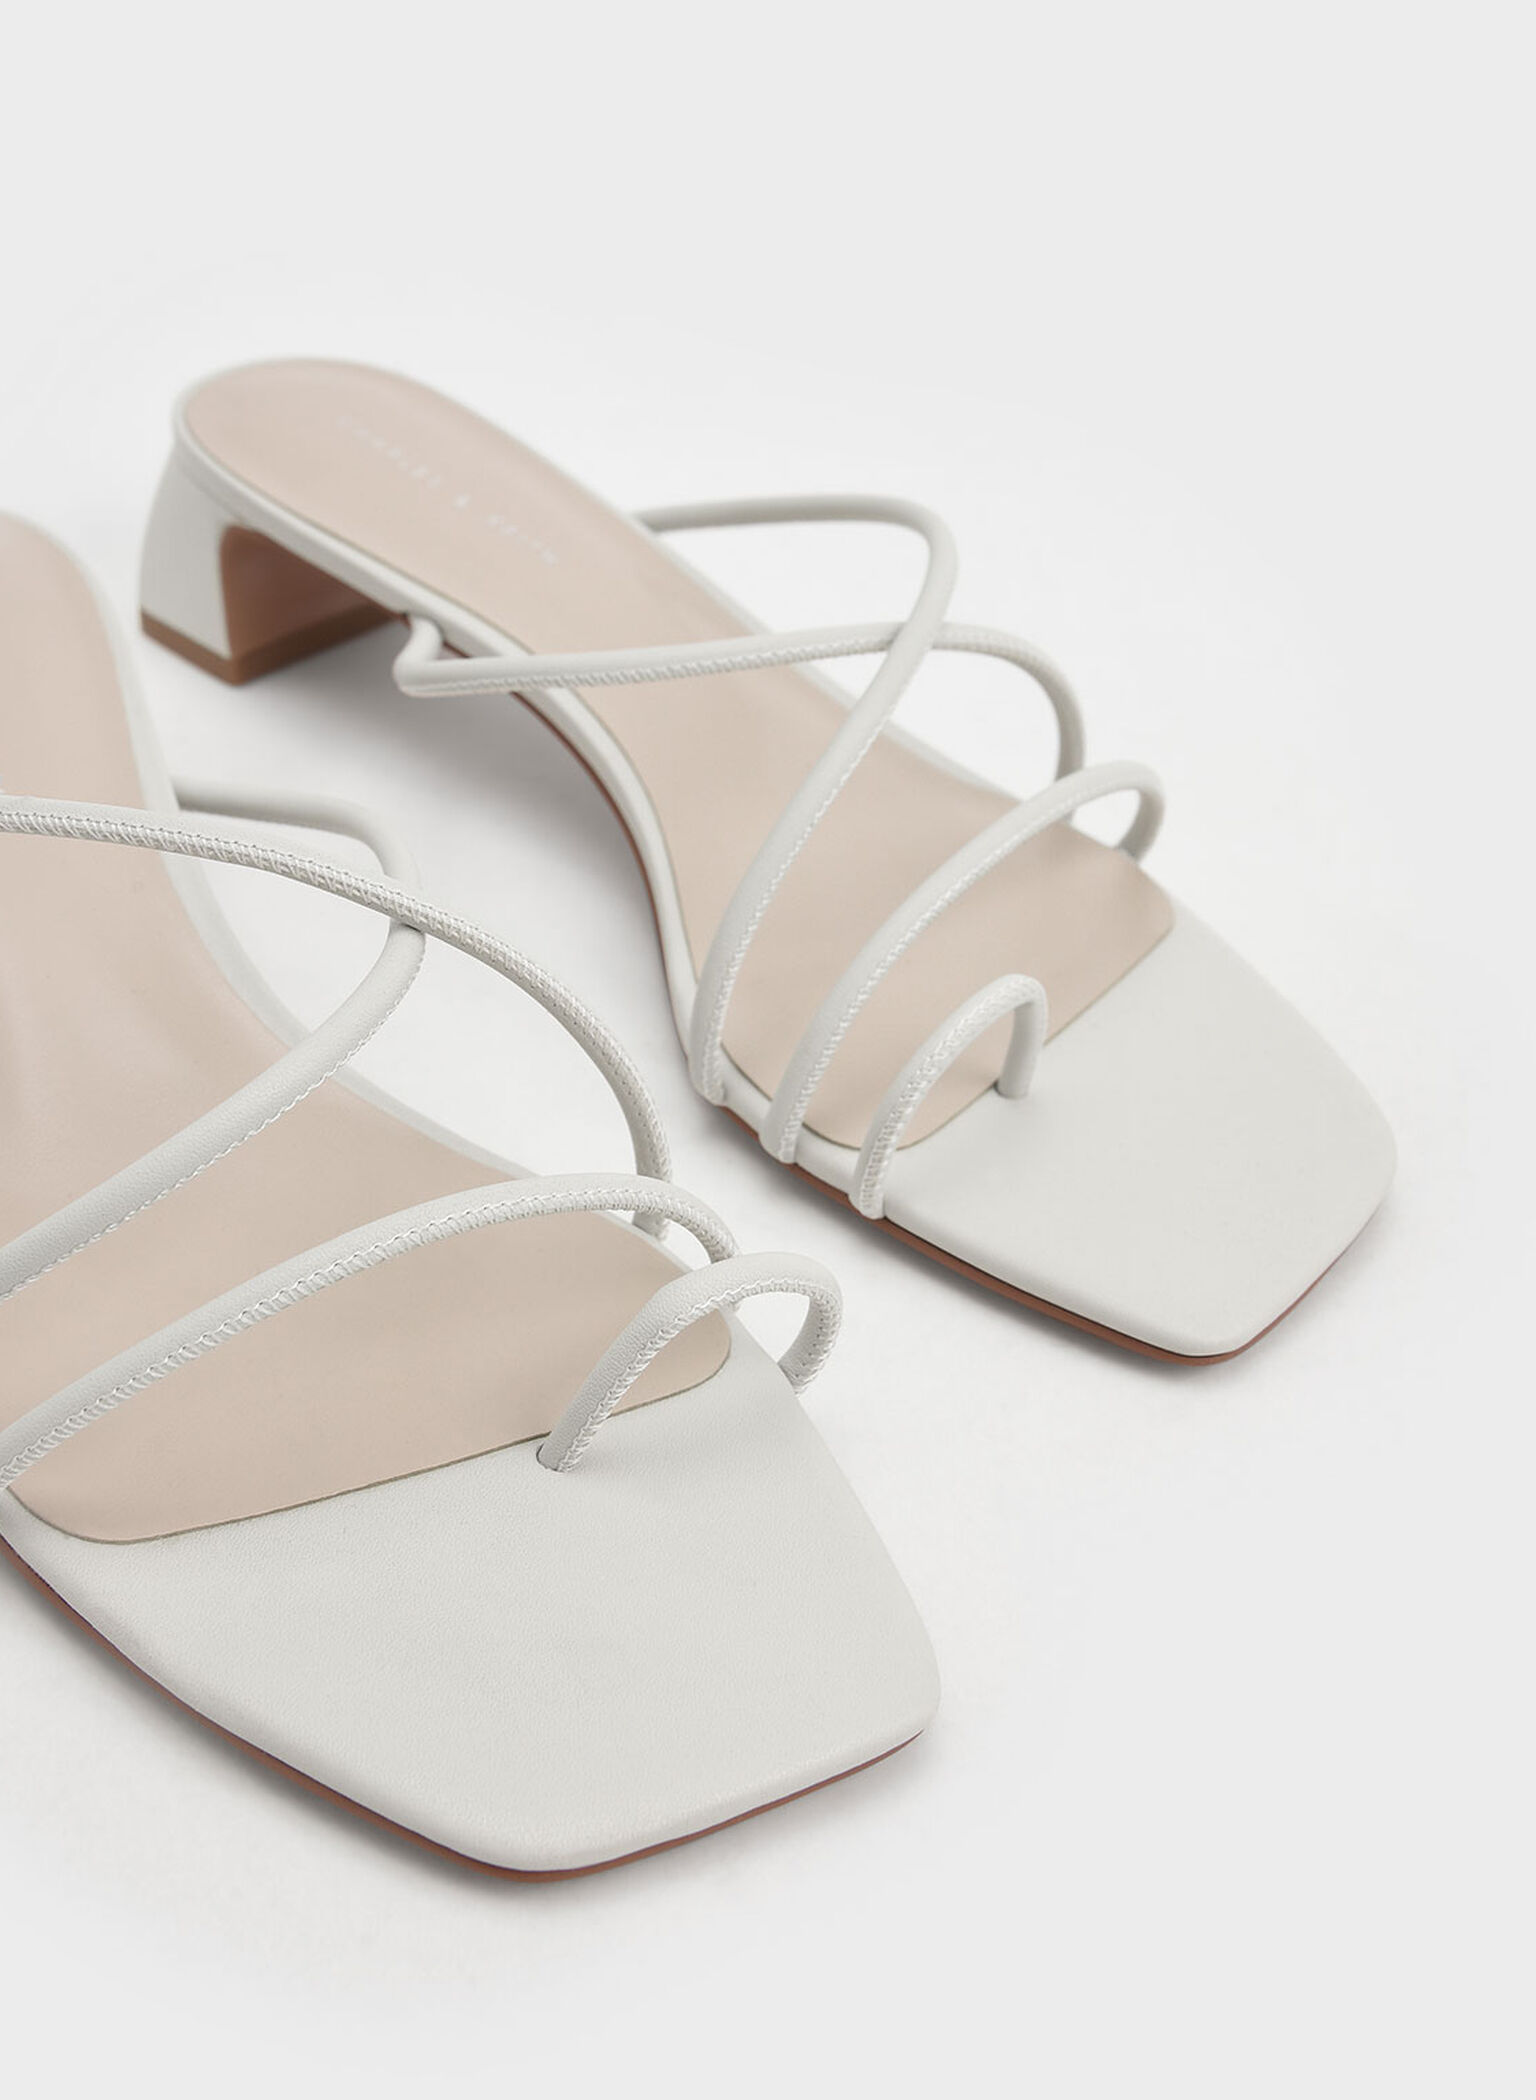 White Strappy Toe Ring Sandals - CHARLES & KEITH US